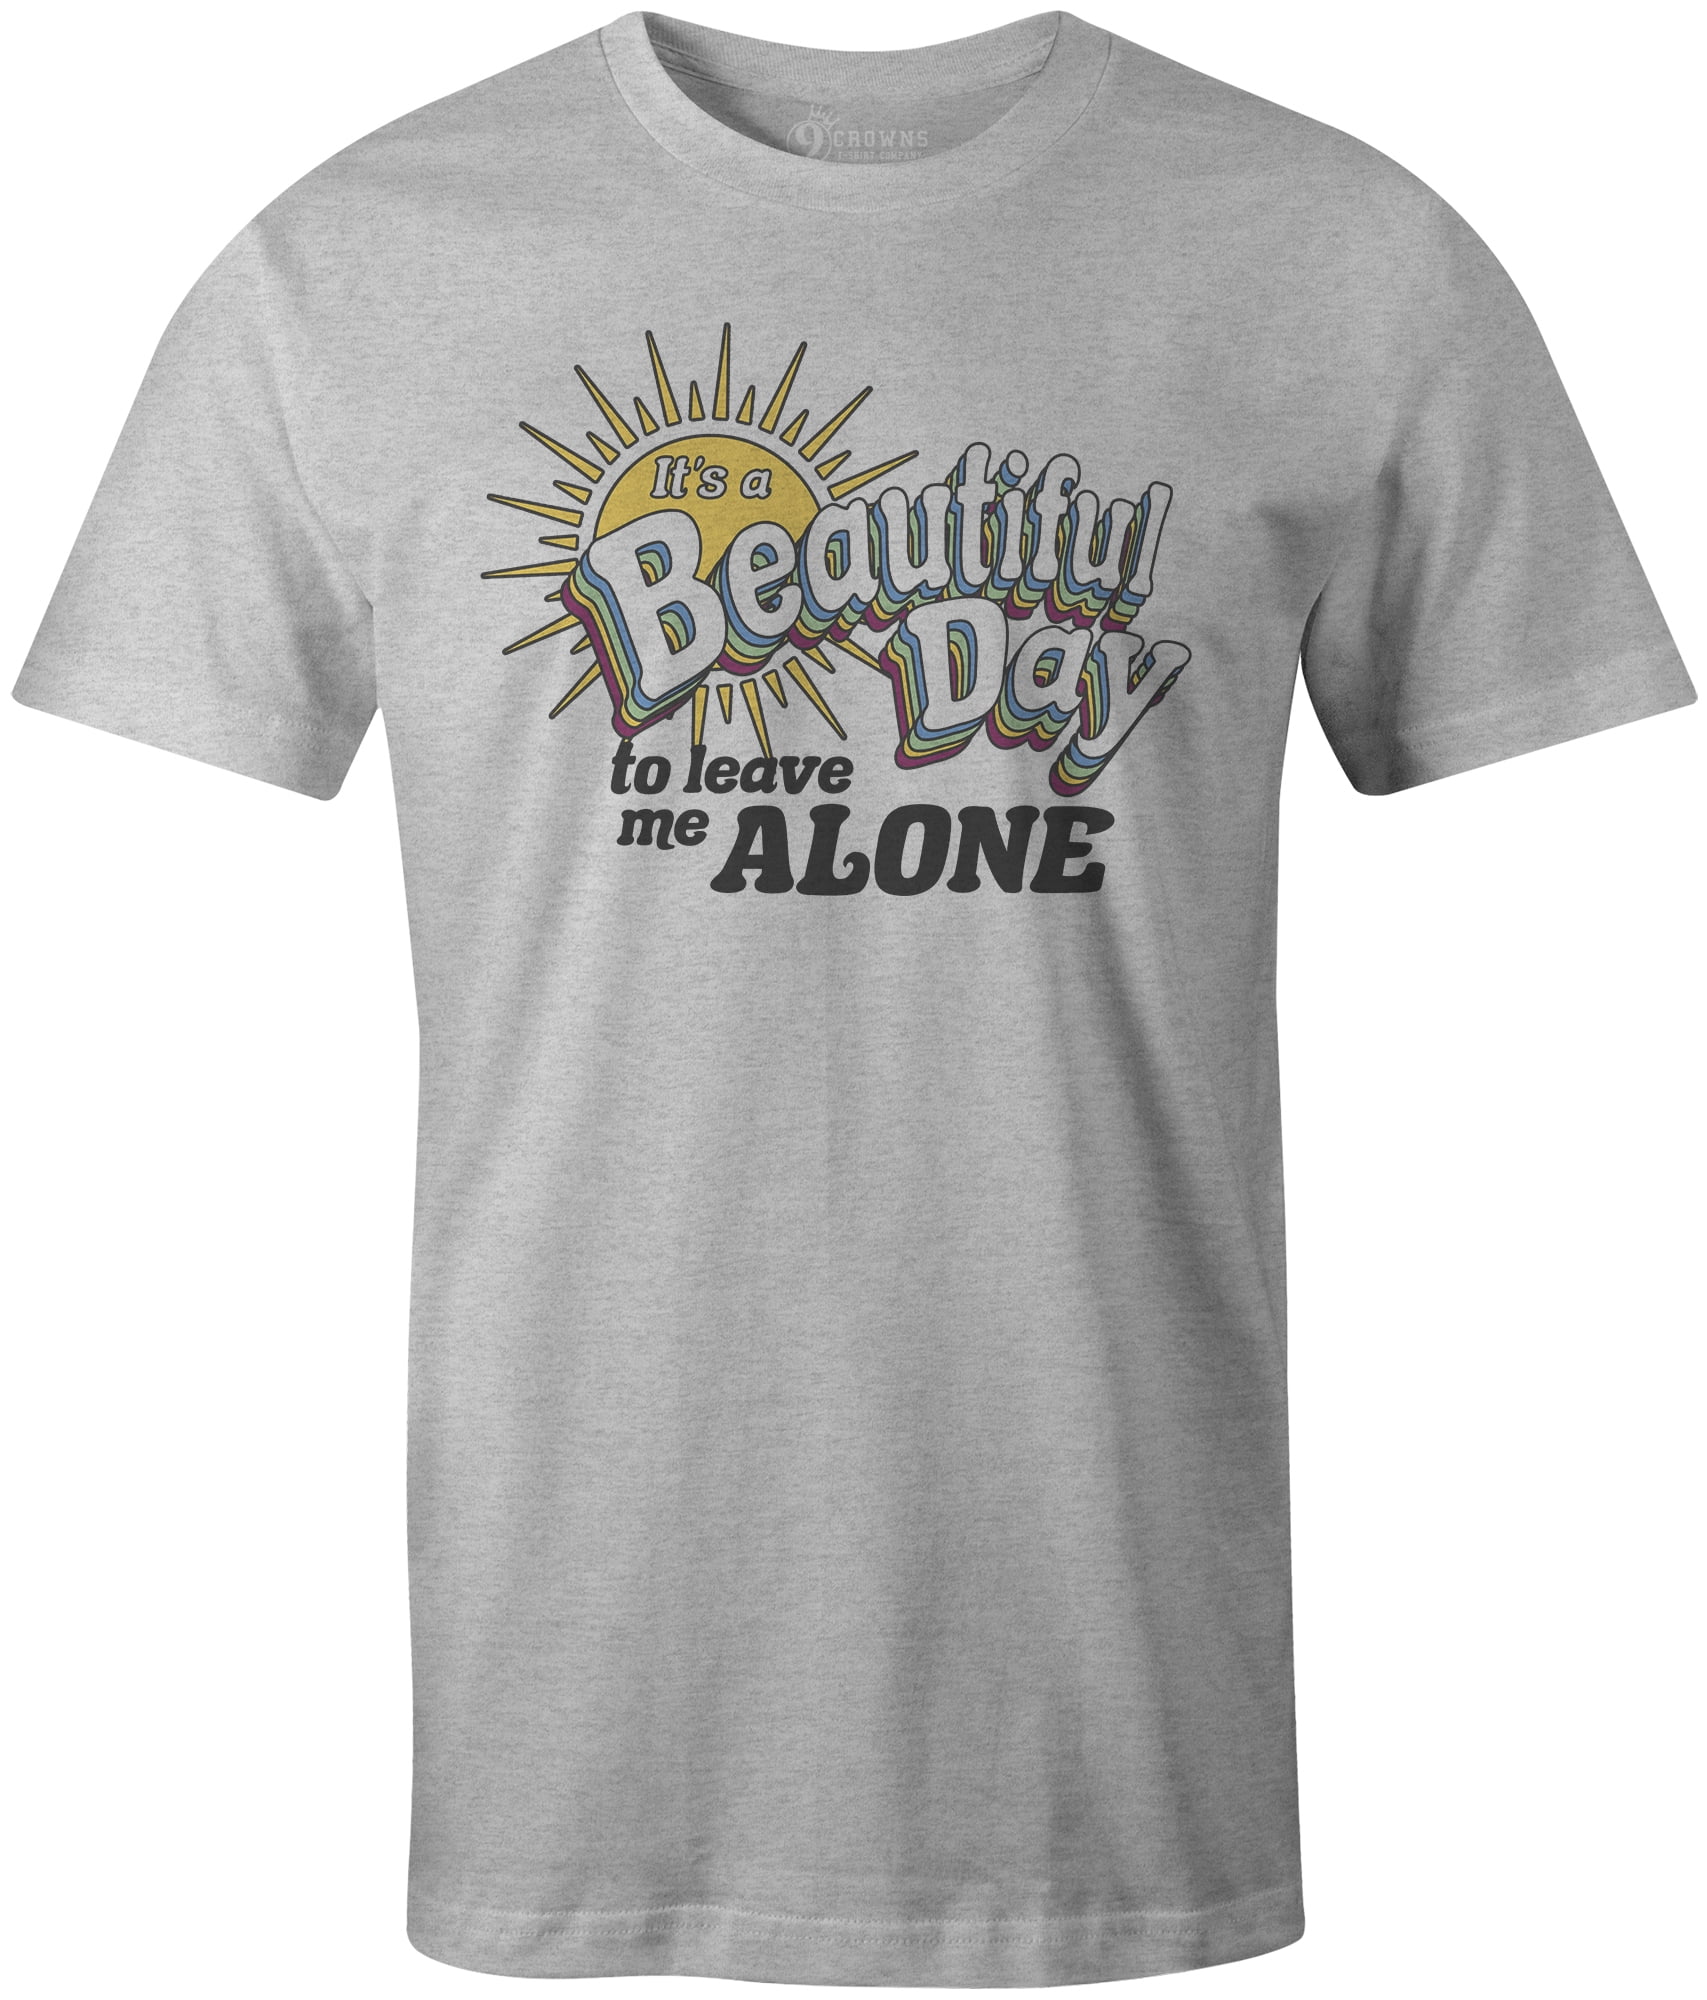 9 Crowns - 9 Crowns Tees It's a Beautiful Day to Leave Me Alone Graphic ...